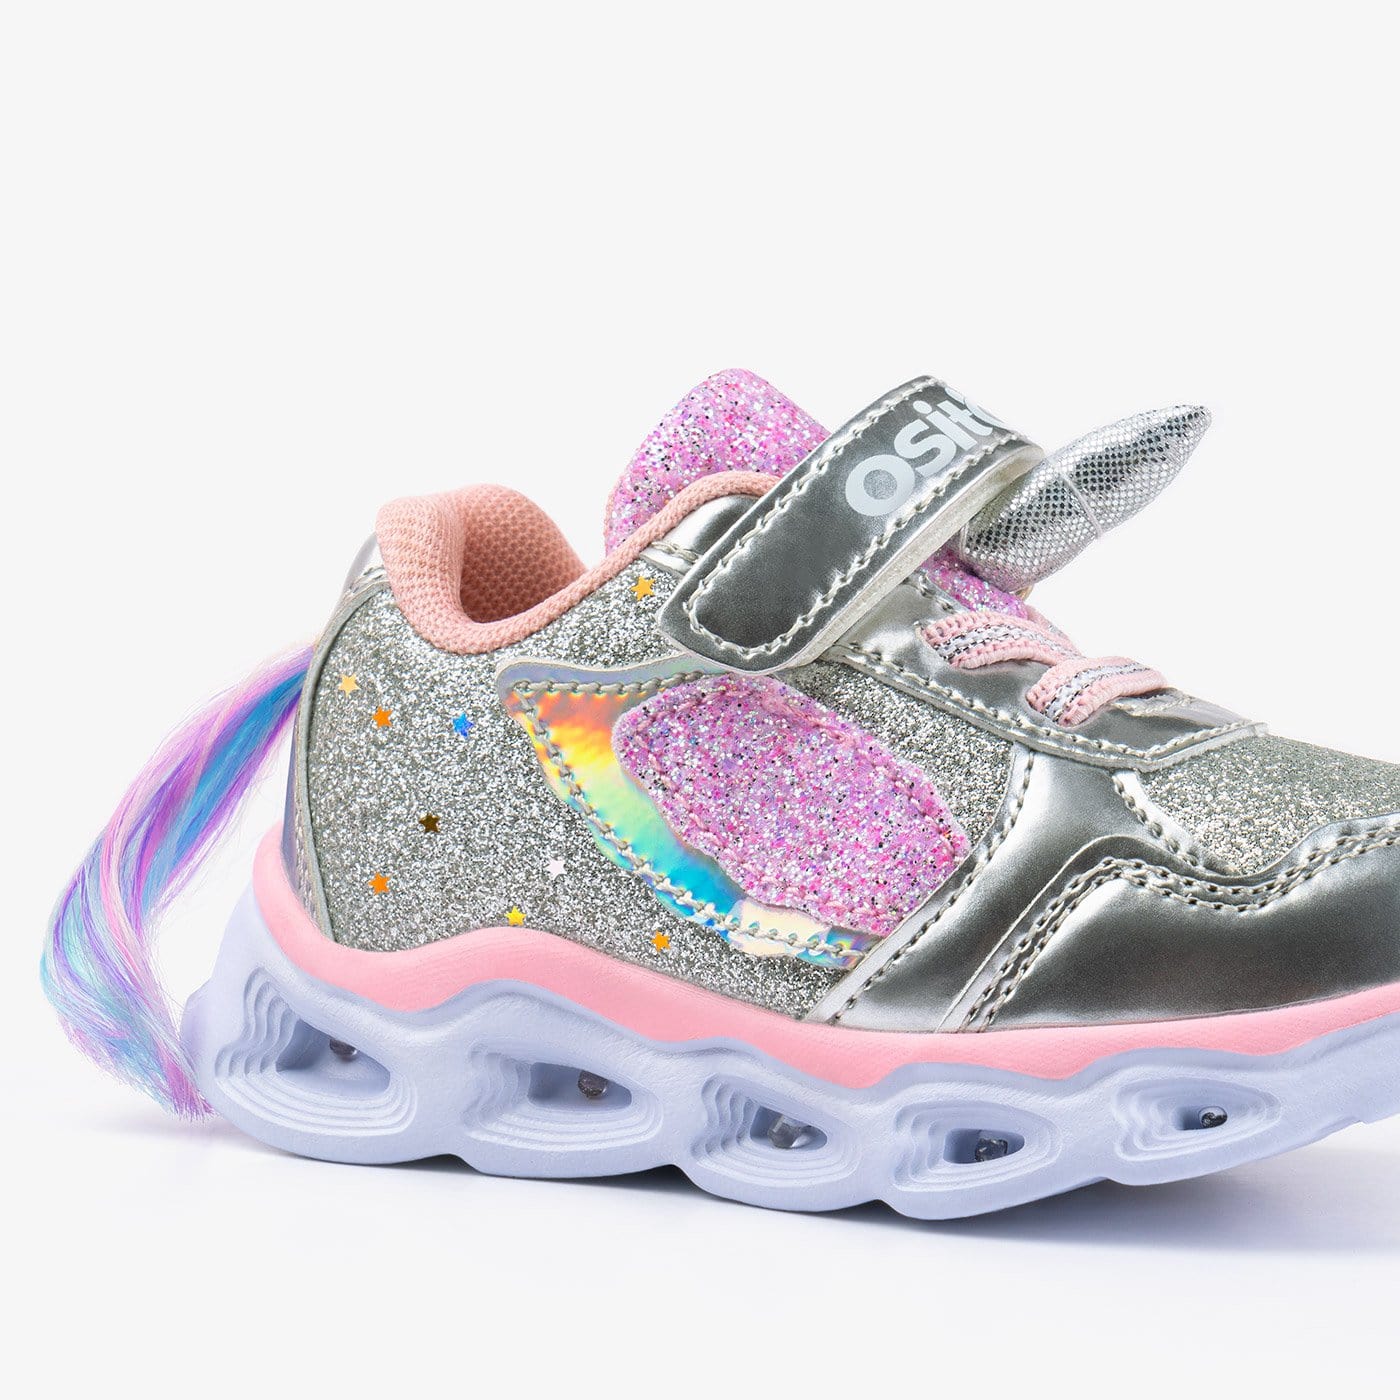 OSITO Shoes Baby's Unicorn Sneakers with Lights